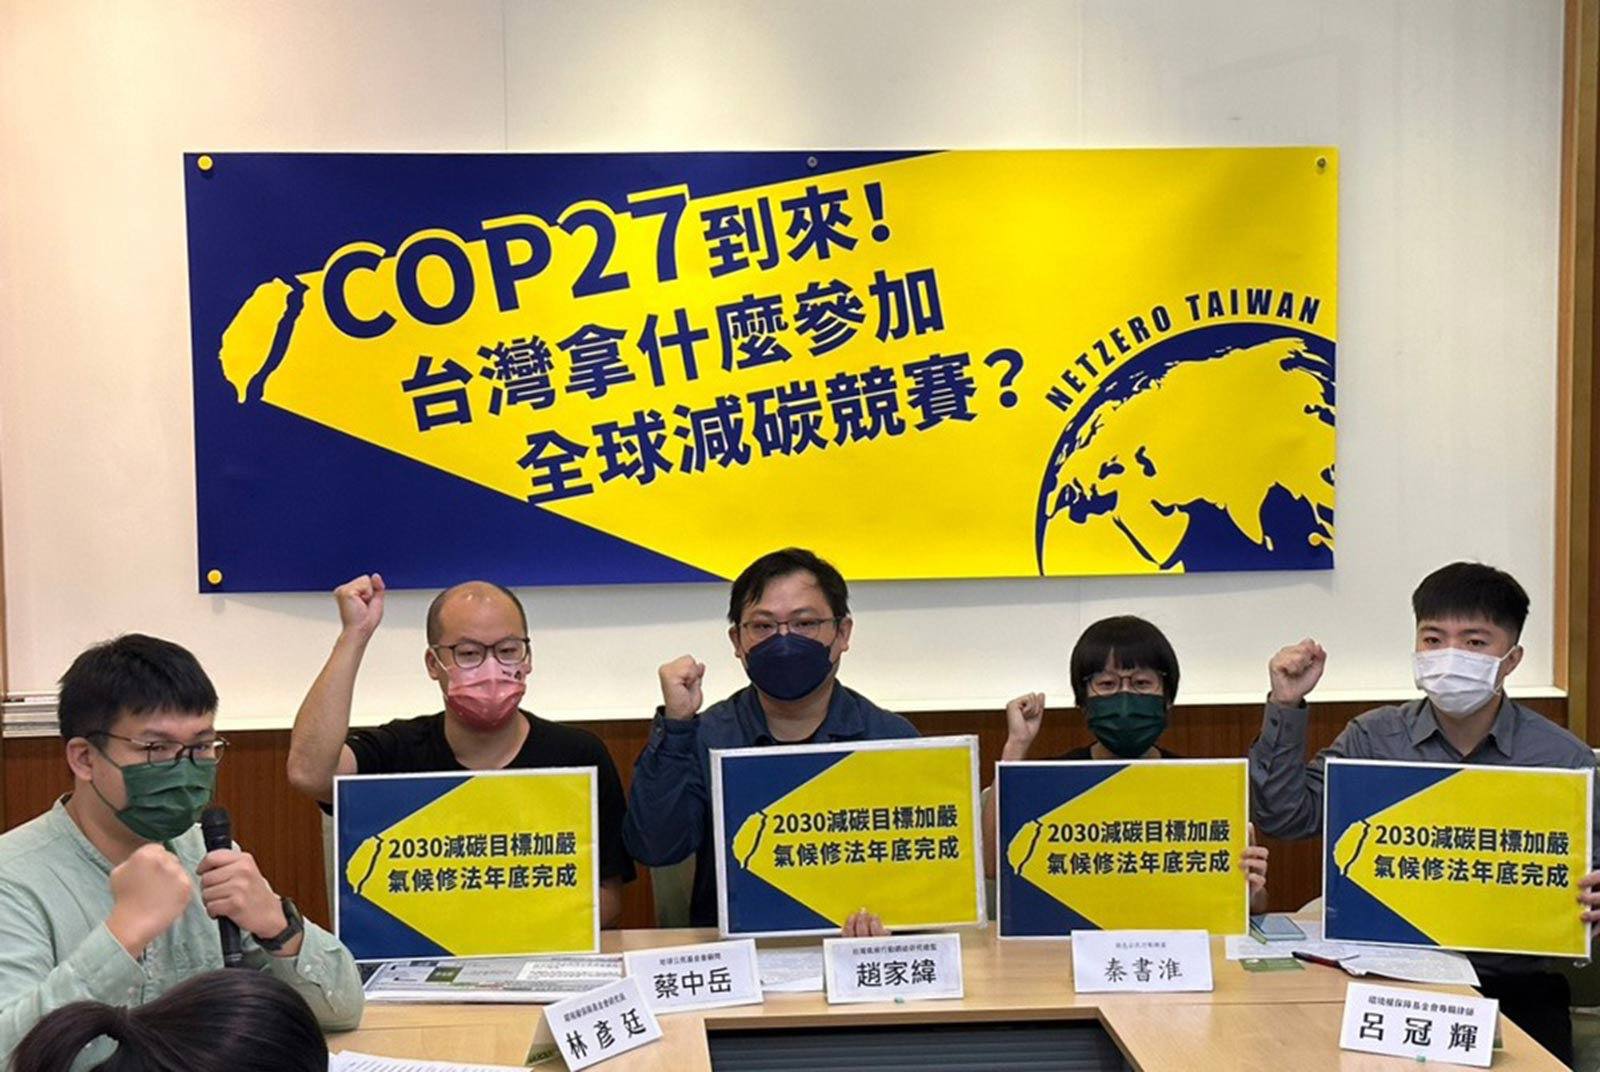 COP27: The Taiwanese view